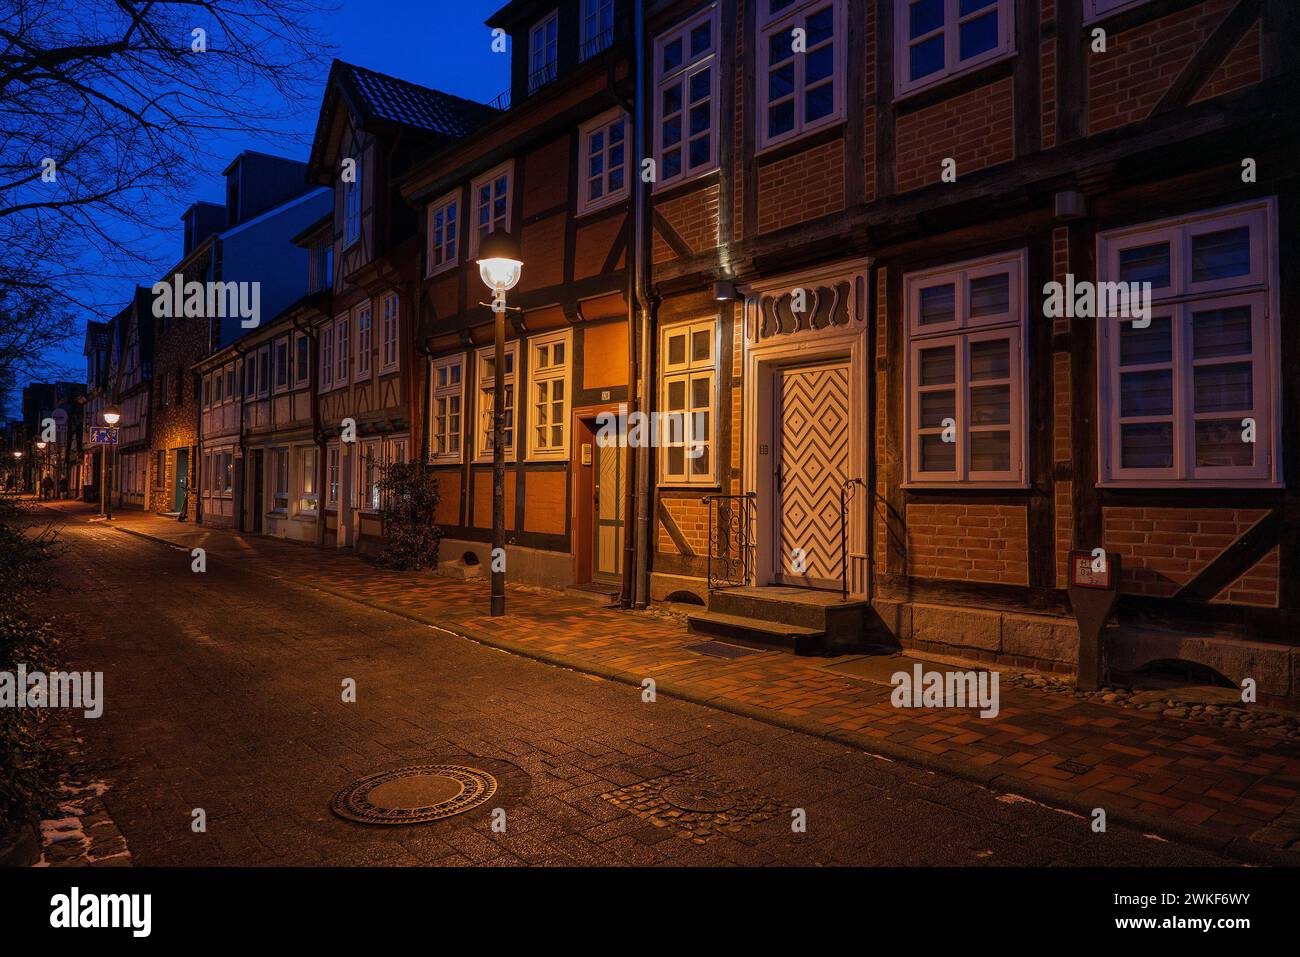 Half-timbered houses in the old town of Celle in Germany. Stock Photo